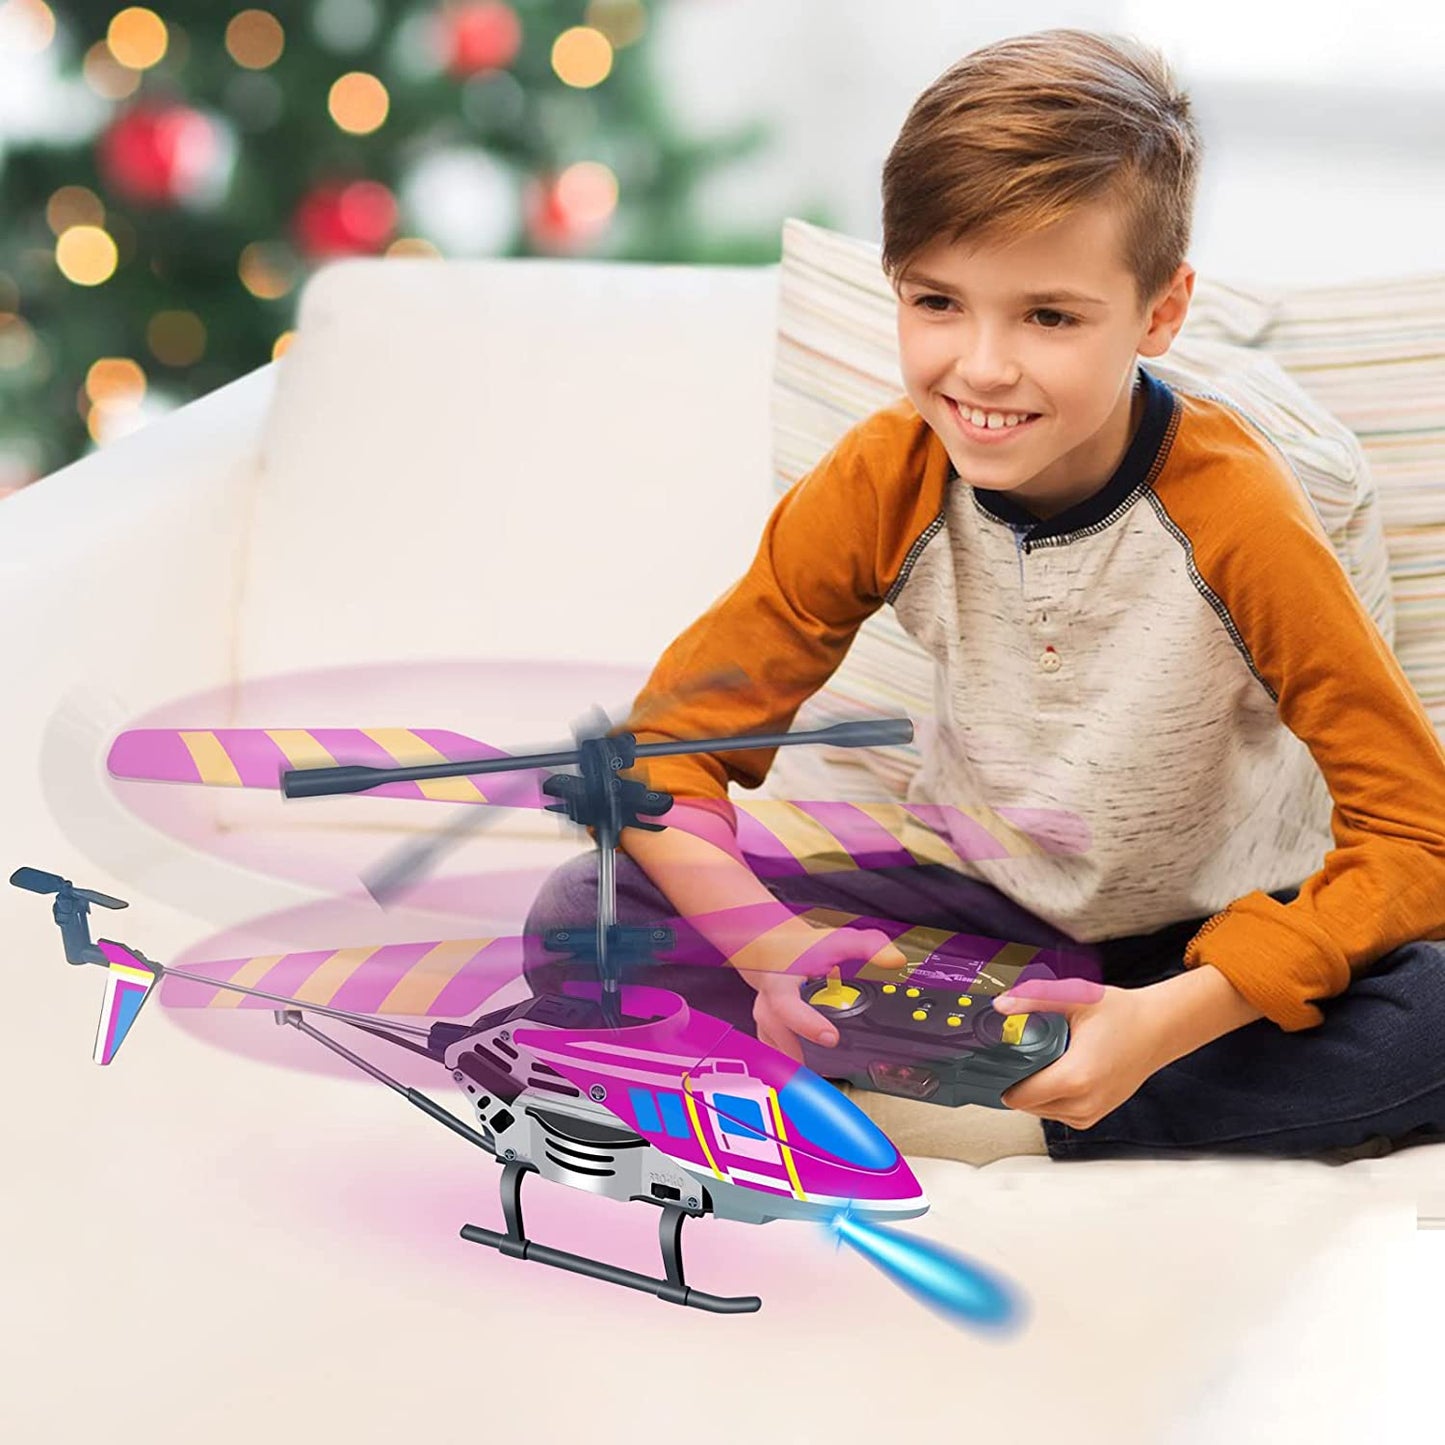 2.4 GHz 3.5 Channel Rc Helicopter Toy with Gyro & LED Light, Perfect Indoor Flying Toy (Purple)